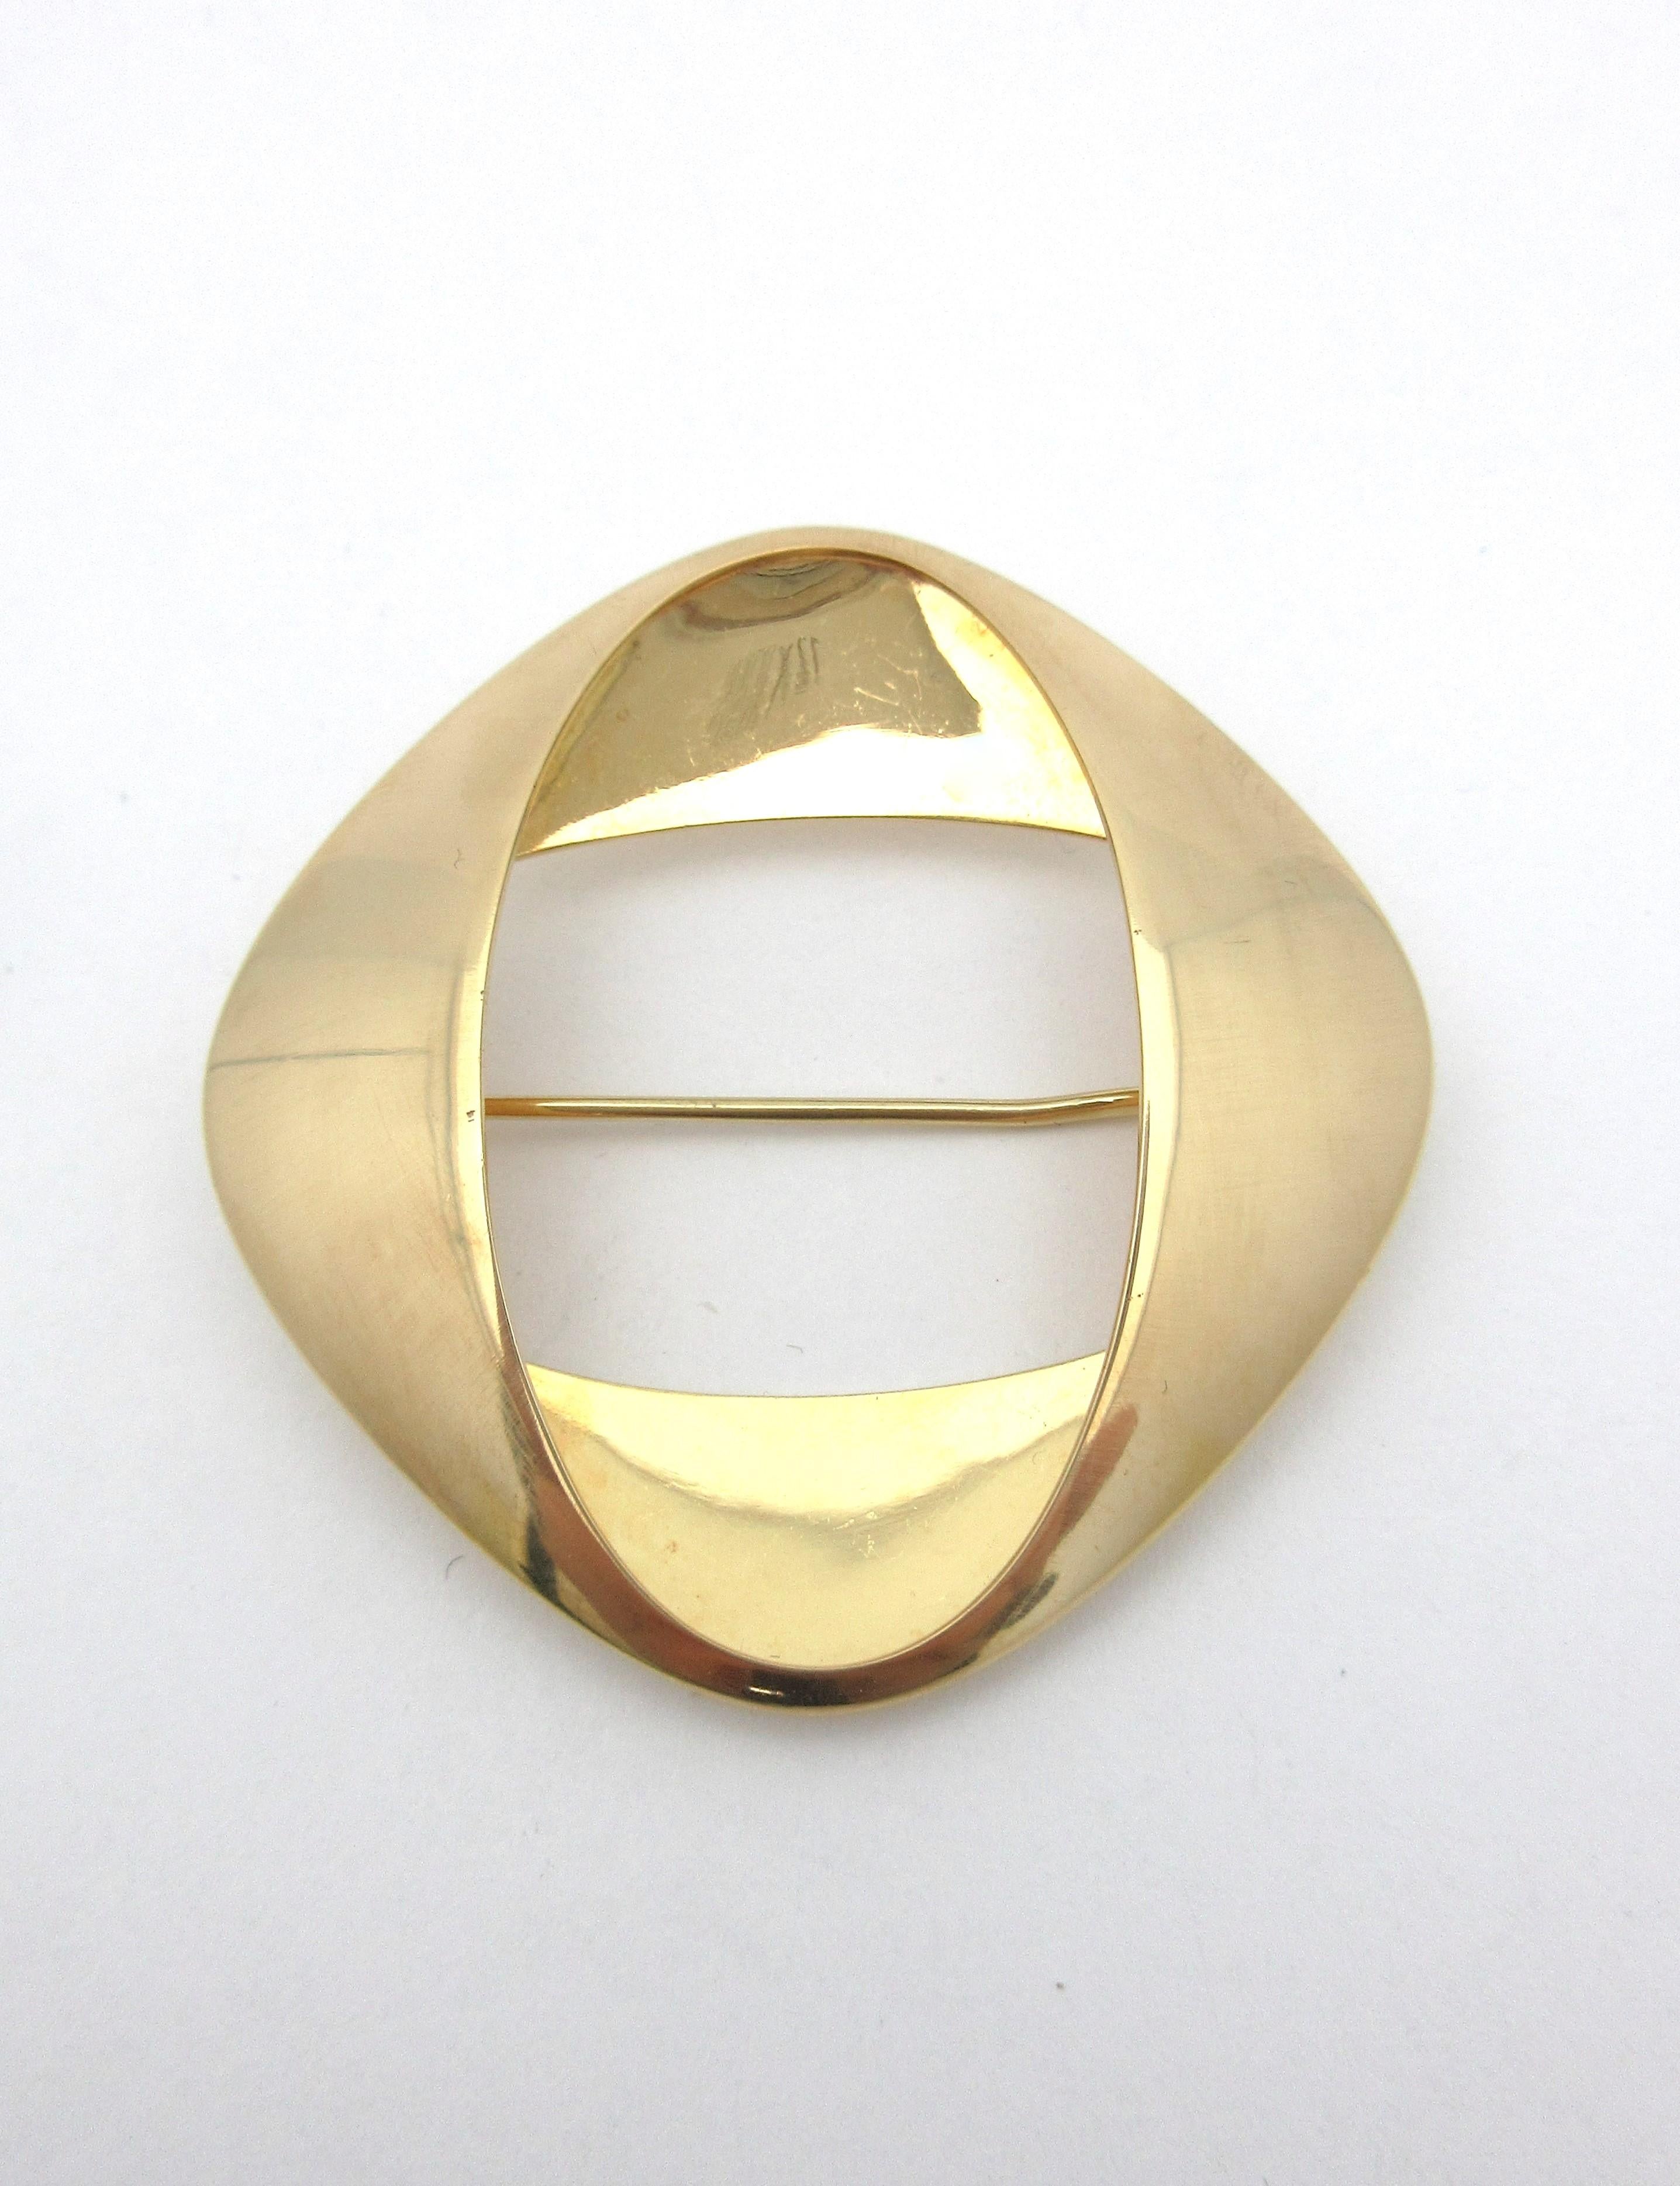 This fabulous brooch is from renowned designer Georg Jensen of Denmark.   Made in 18k yellow gold, the piece features a large soft square design.  It measures 1.75